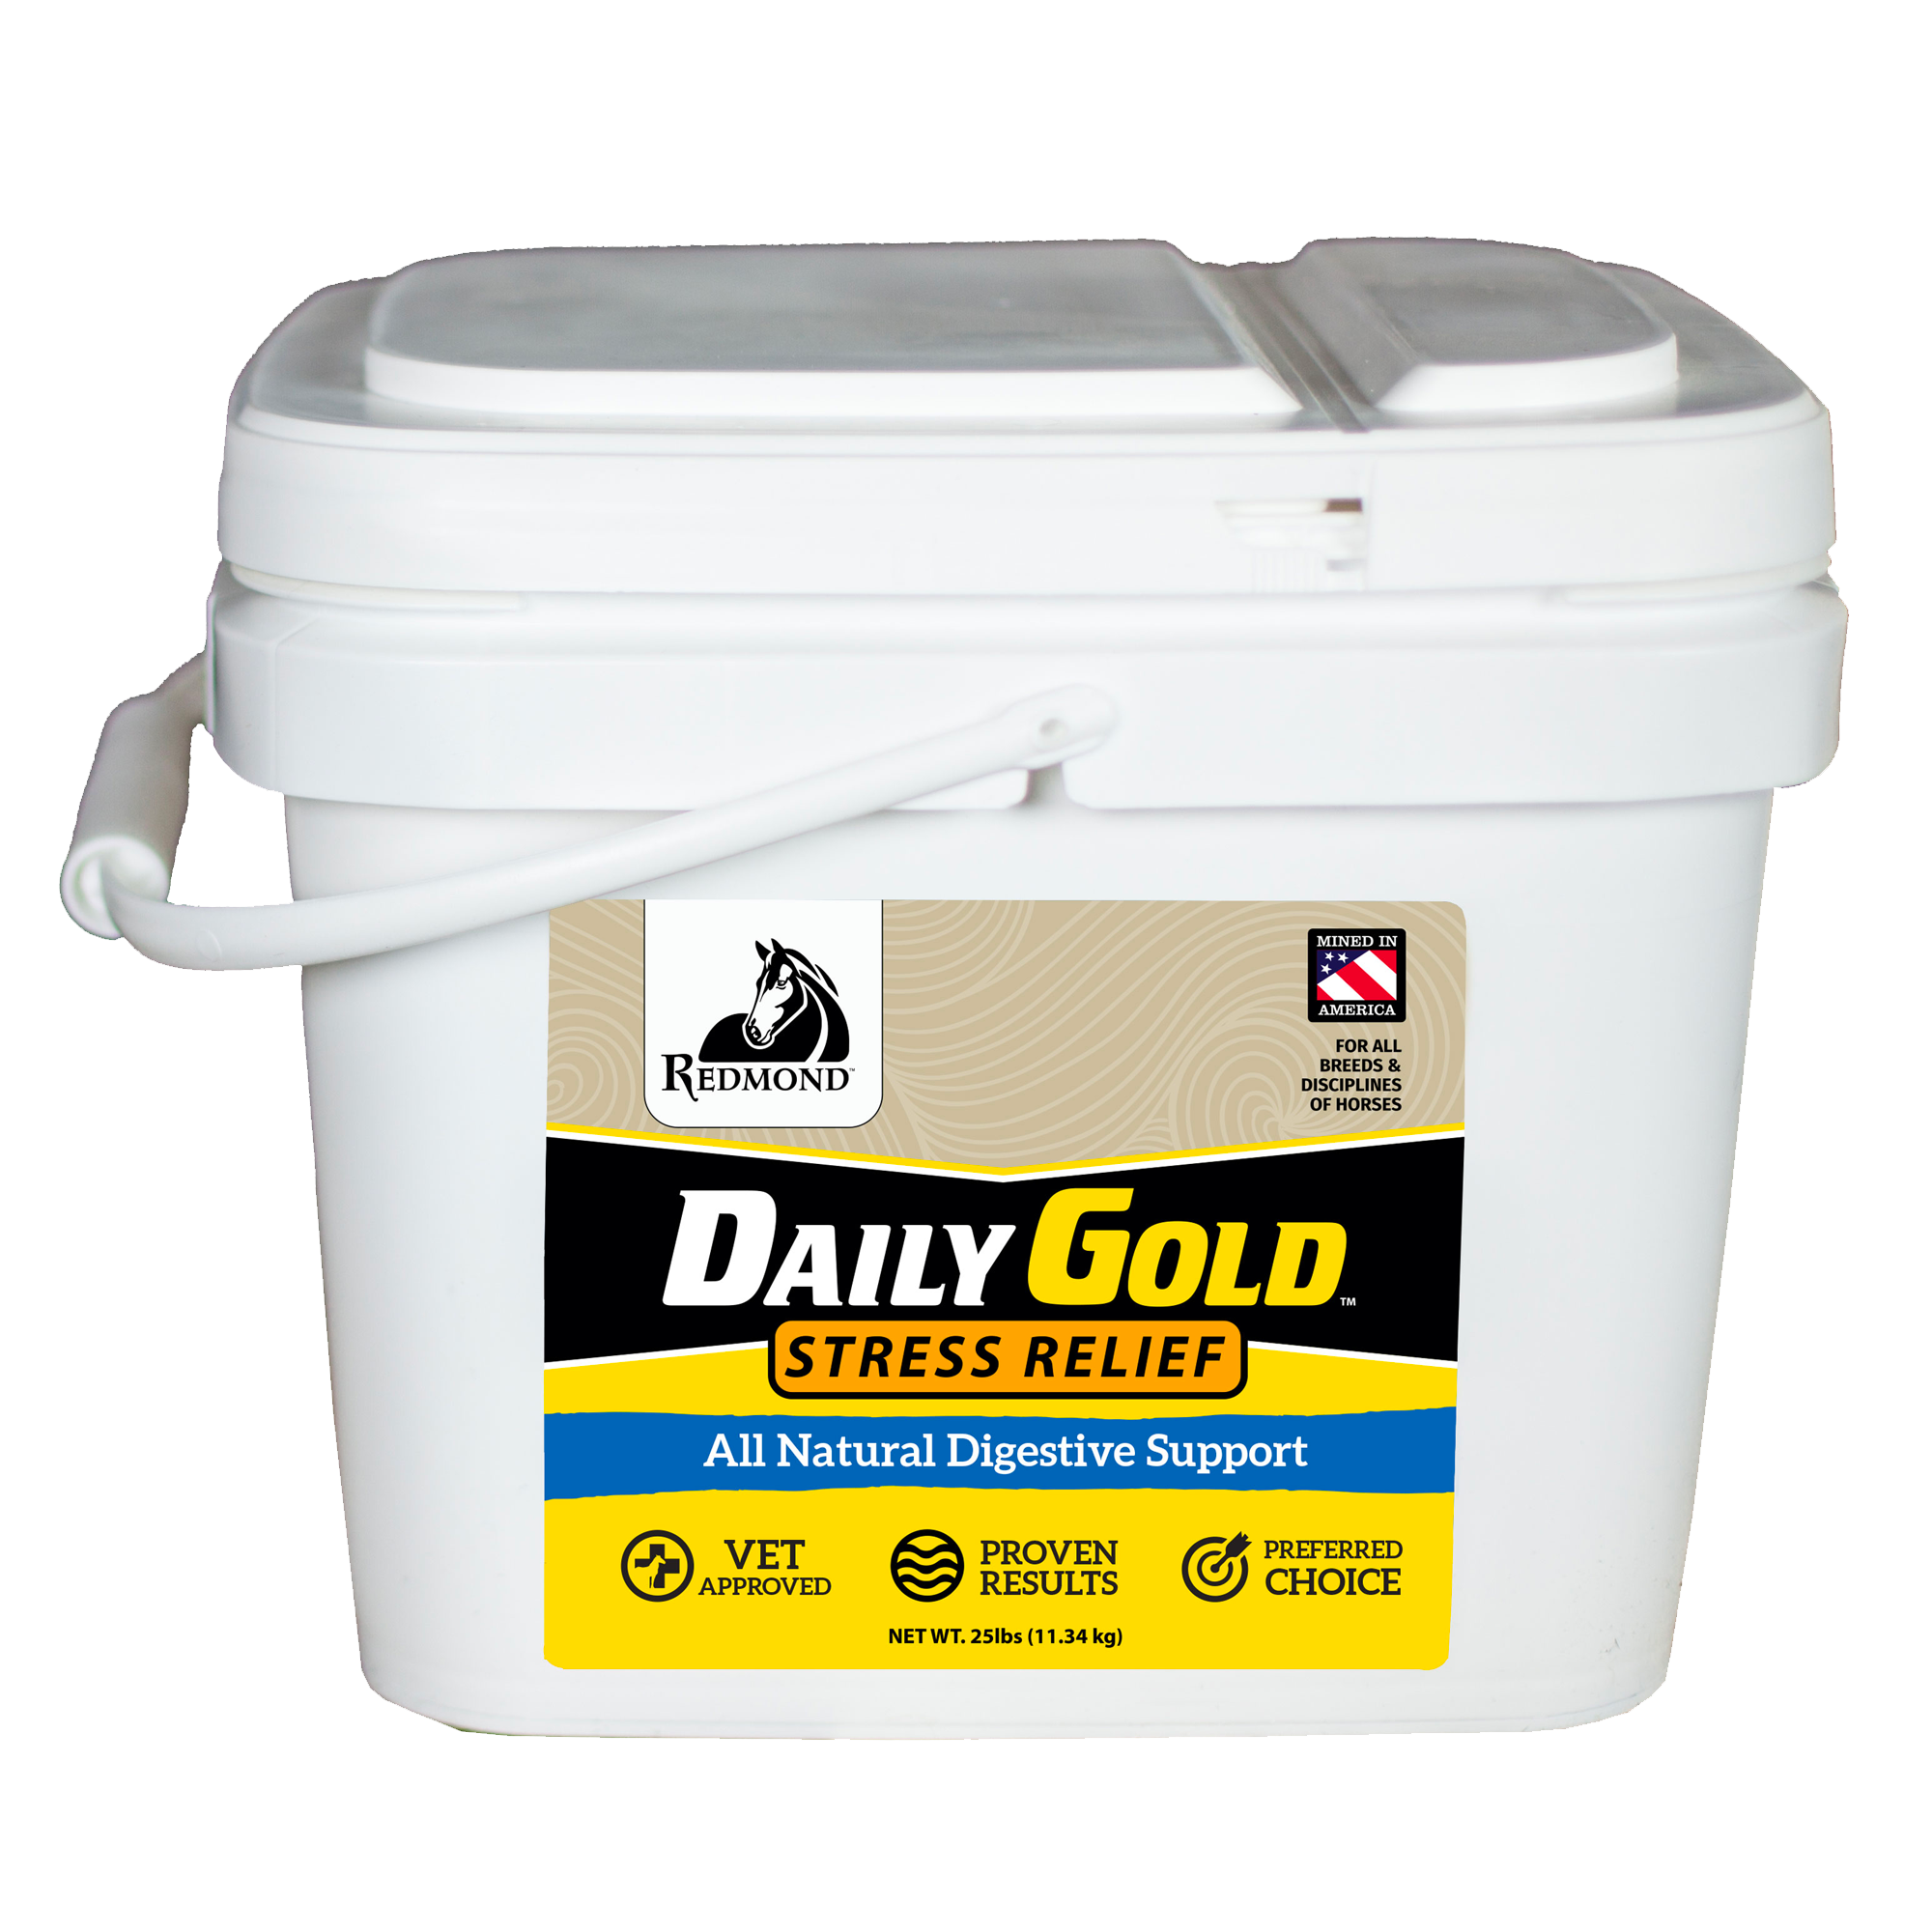 Daily-Gold-25lb-bucket-1